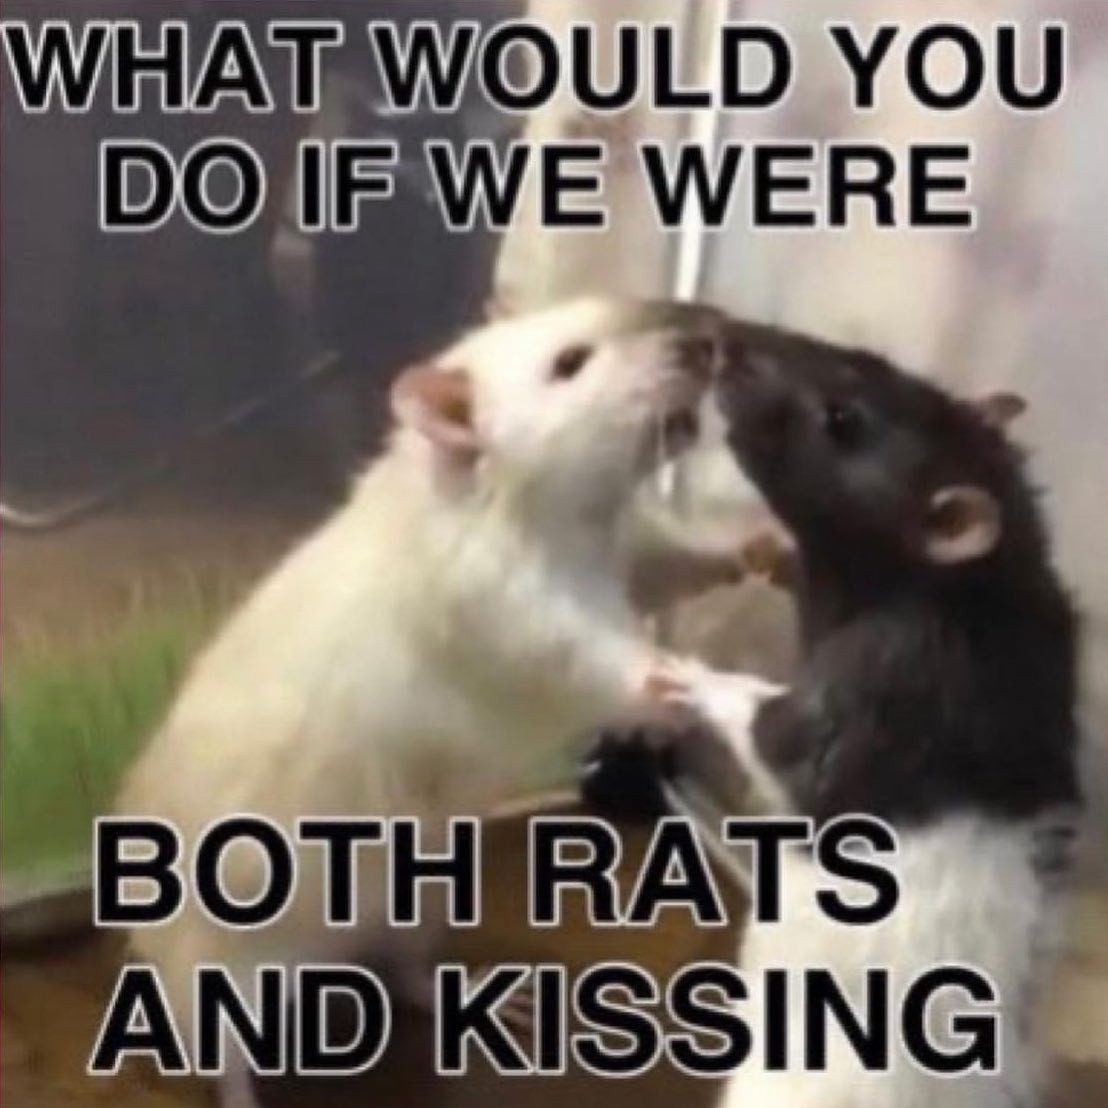 IF WE WERE BOTH RATS AND KISSING